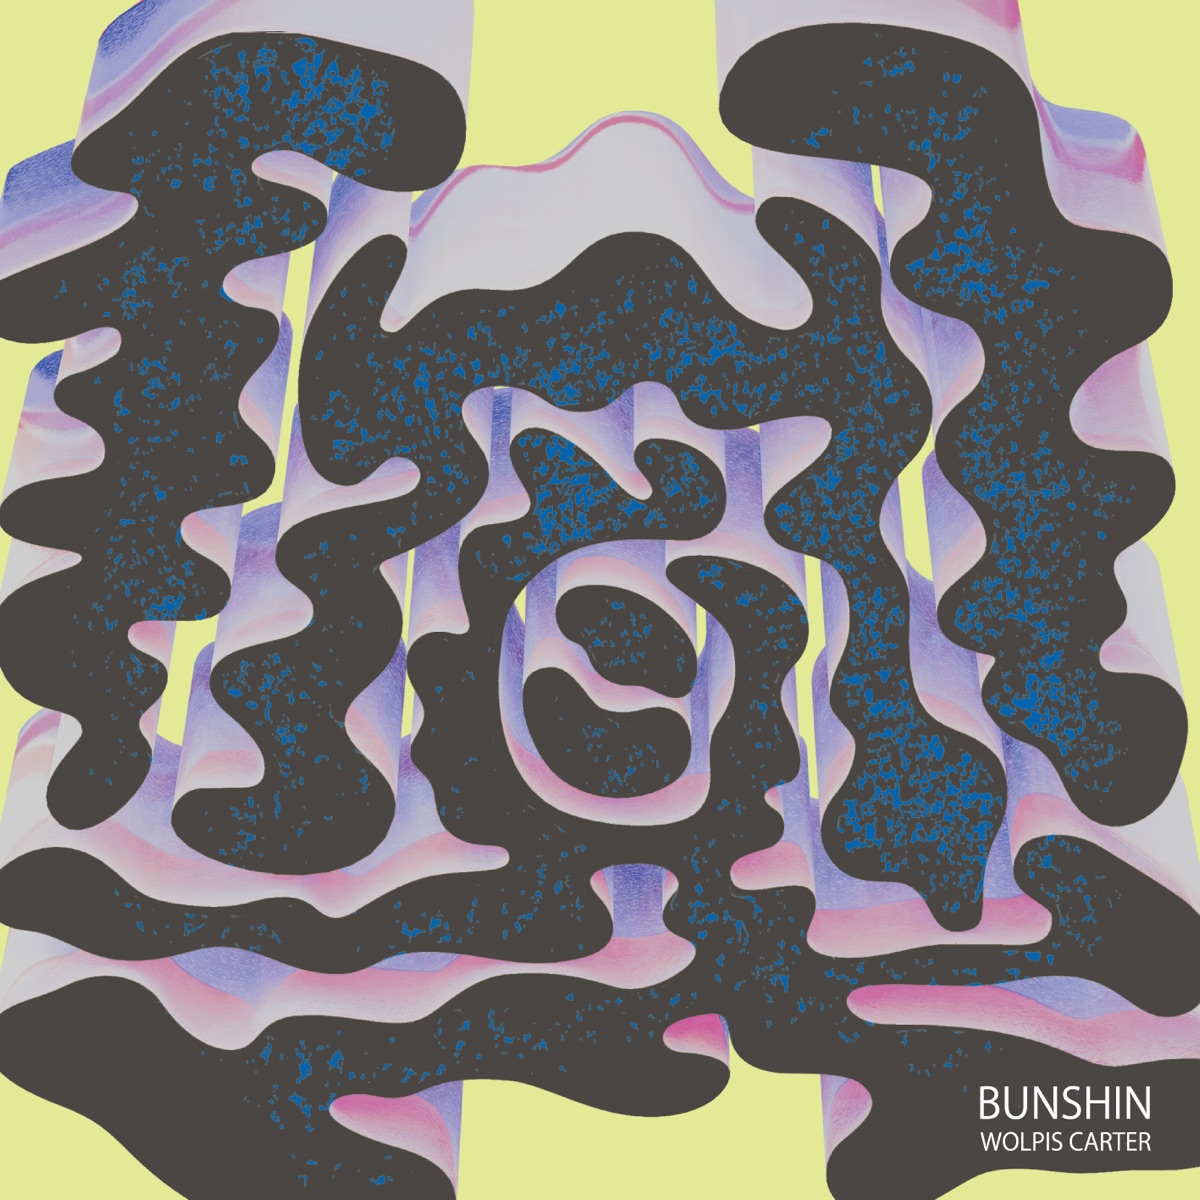 Cover art for『Wolpis Carter - 分身』from the release『Bunshin